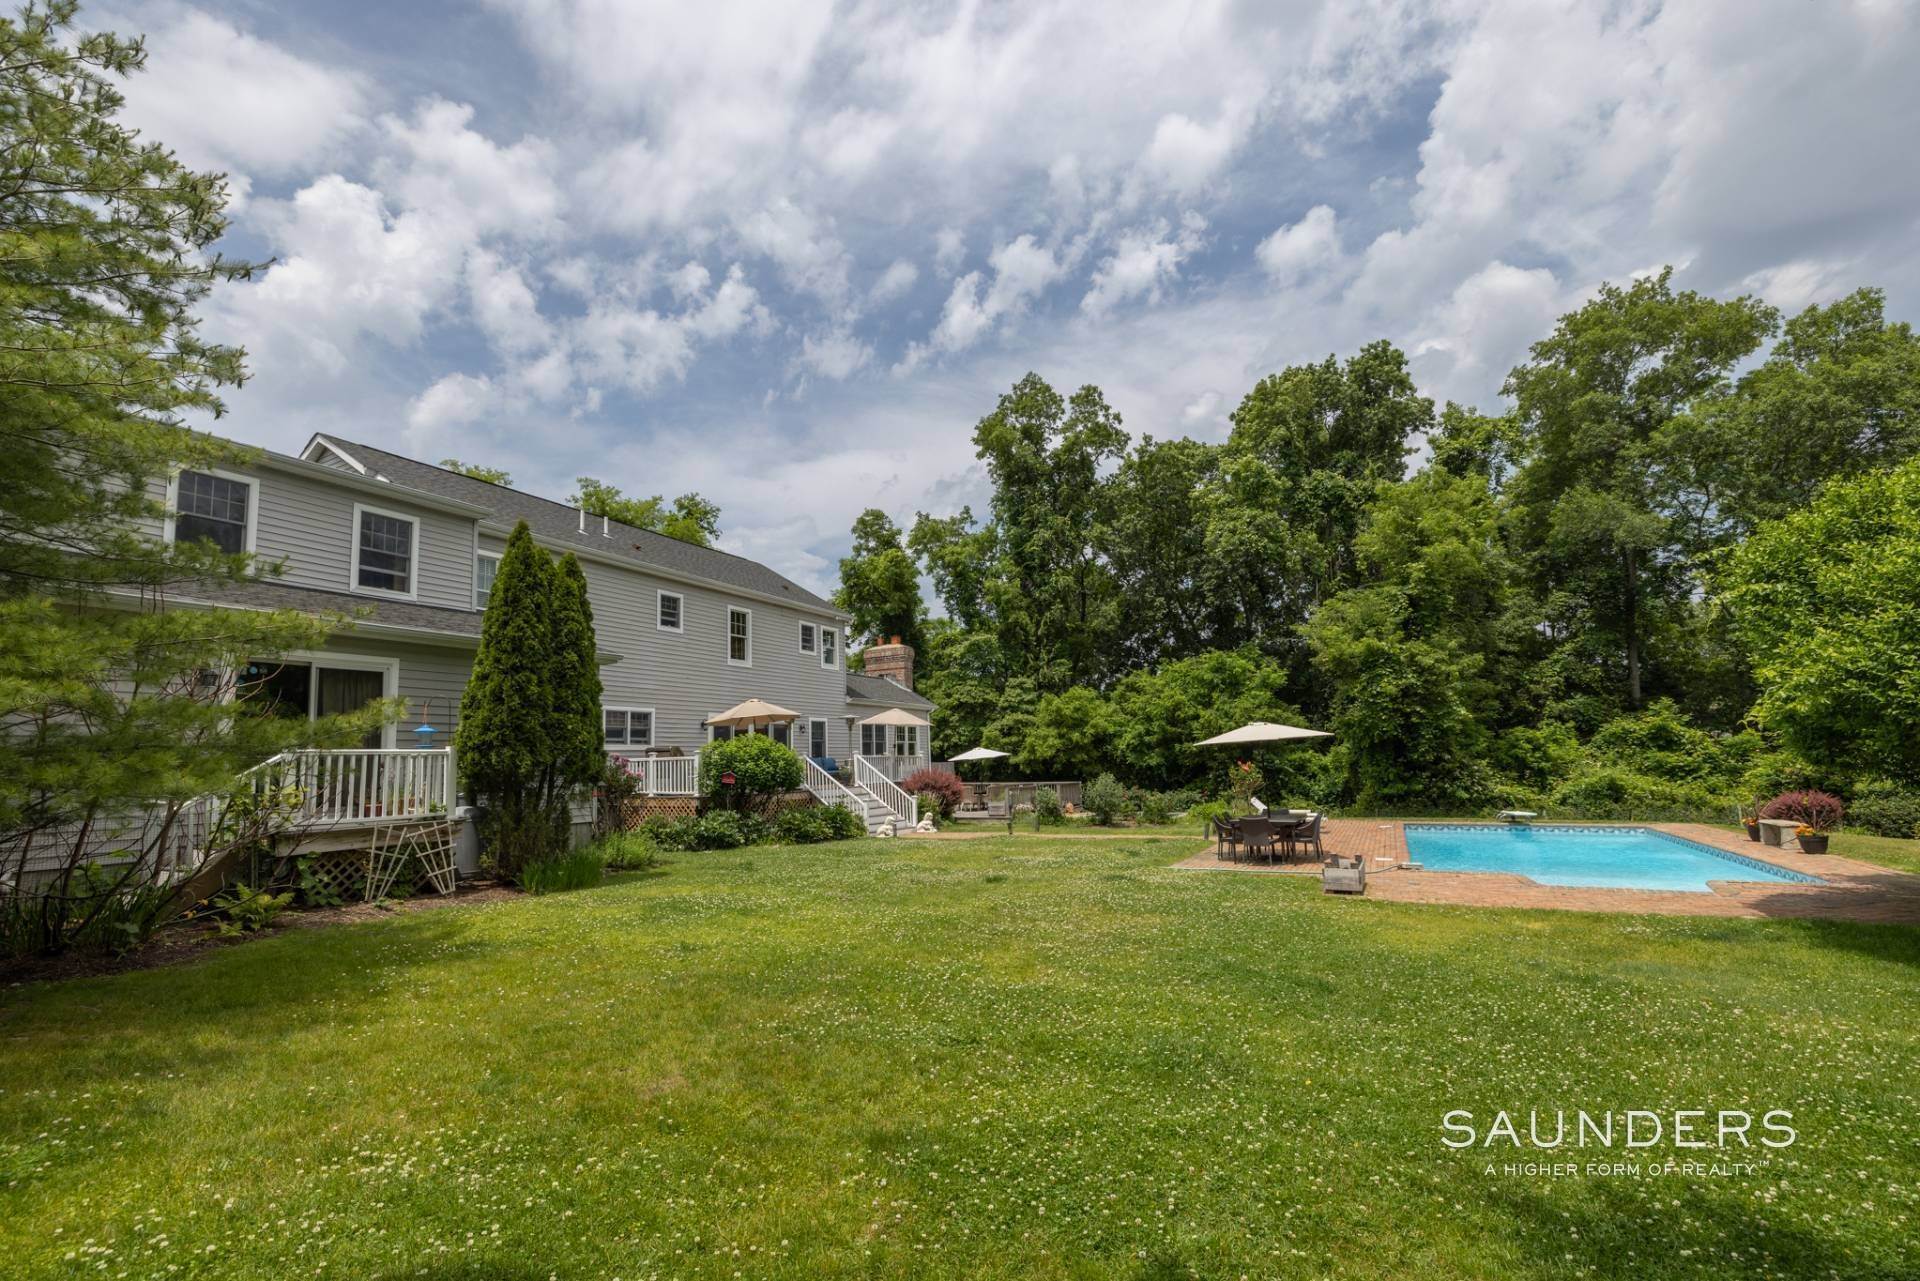 19. Single Family Homes for Sale at Spacious Colonial On 1.6 Acres With Accessory Apartment 2 Do's Way (320 Noyack Road), North Sea, Southampton, NY 11968